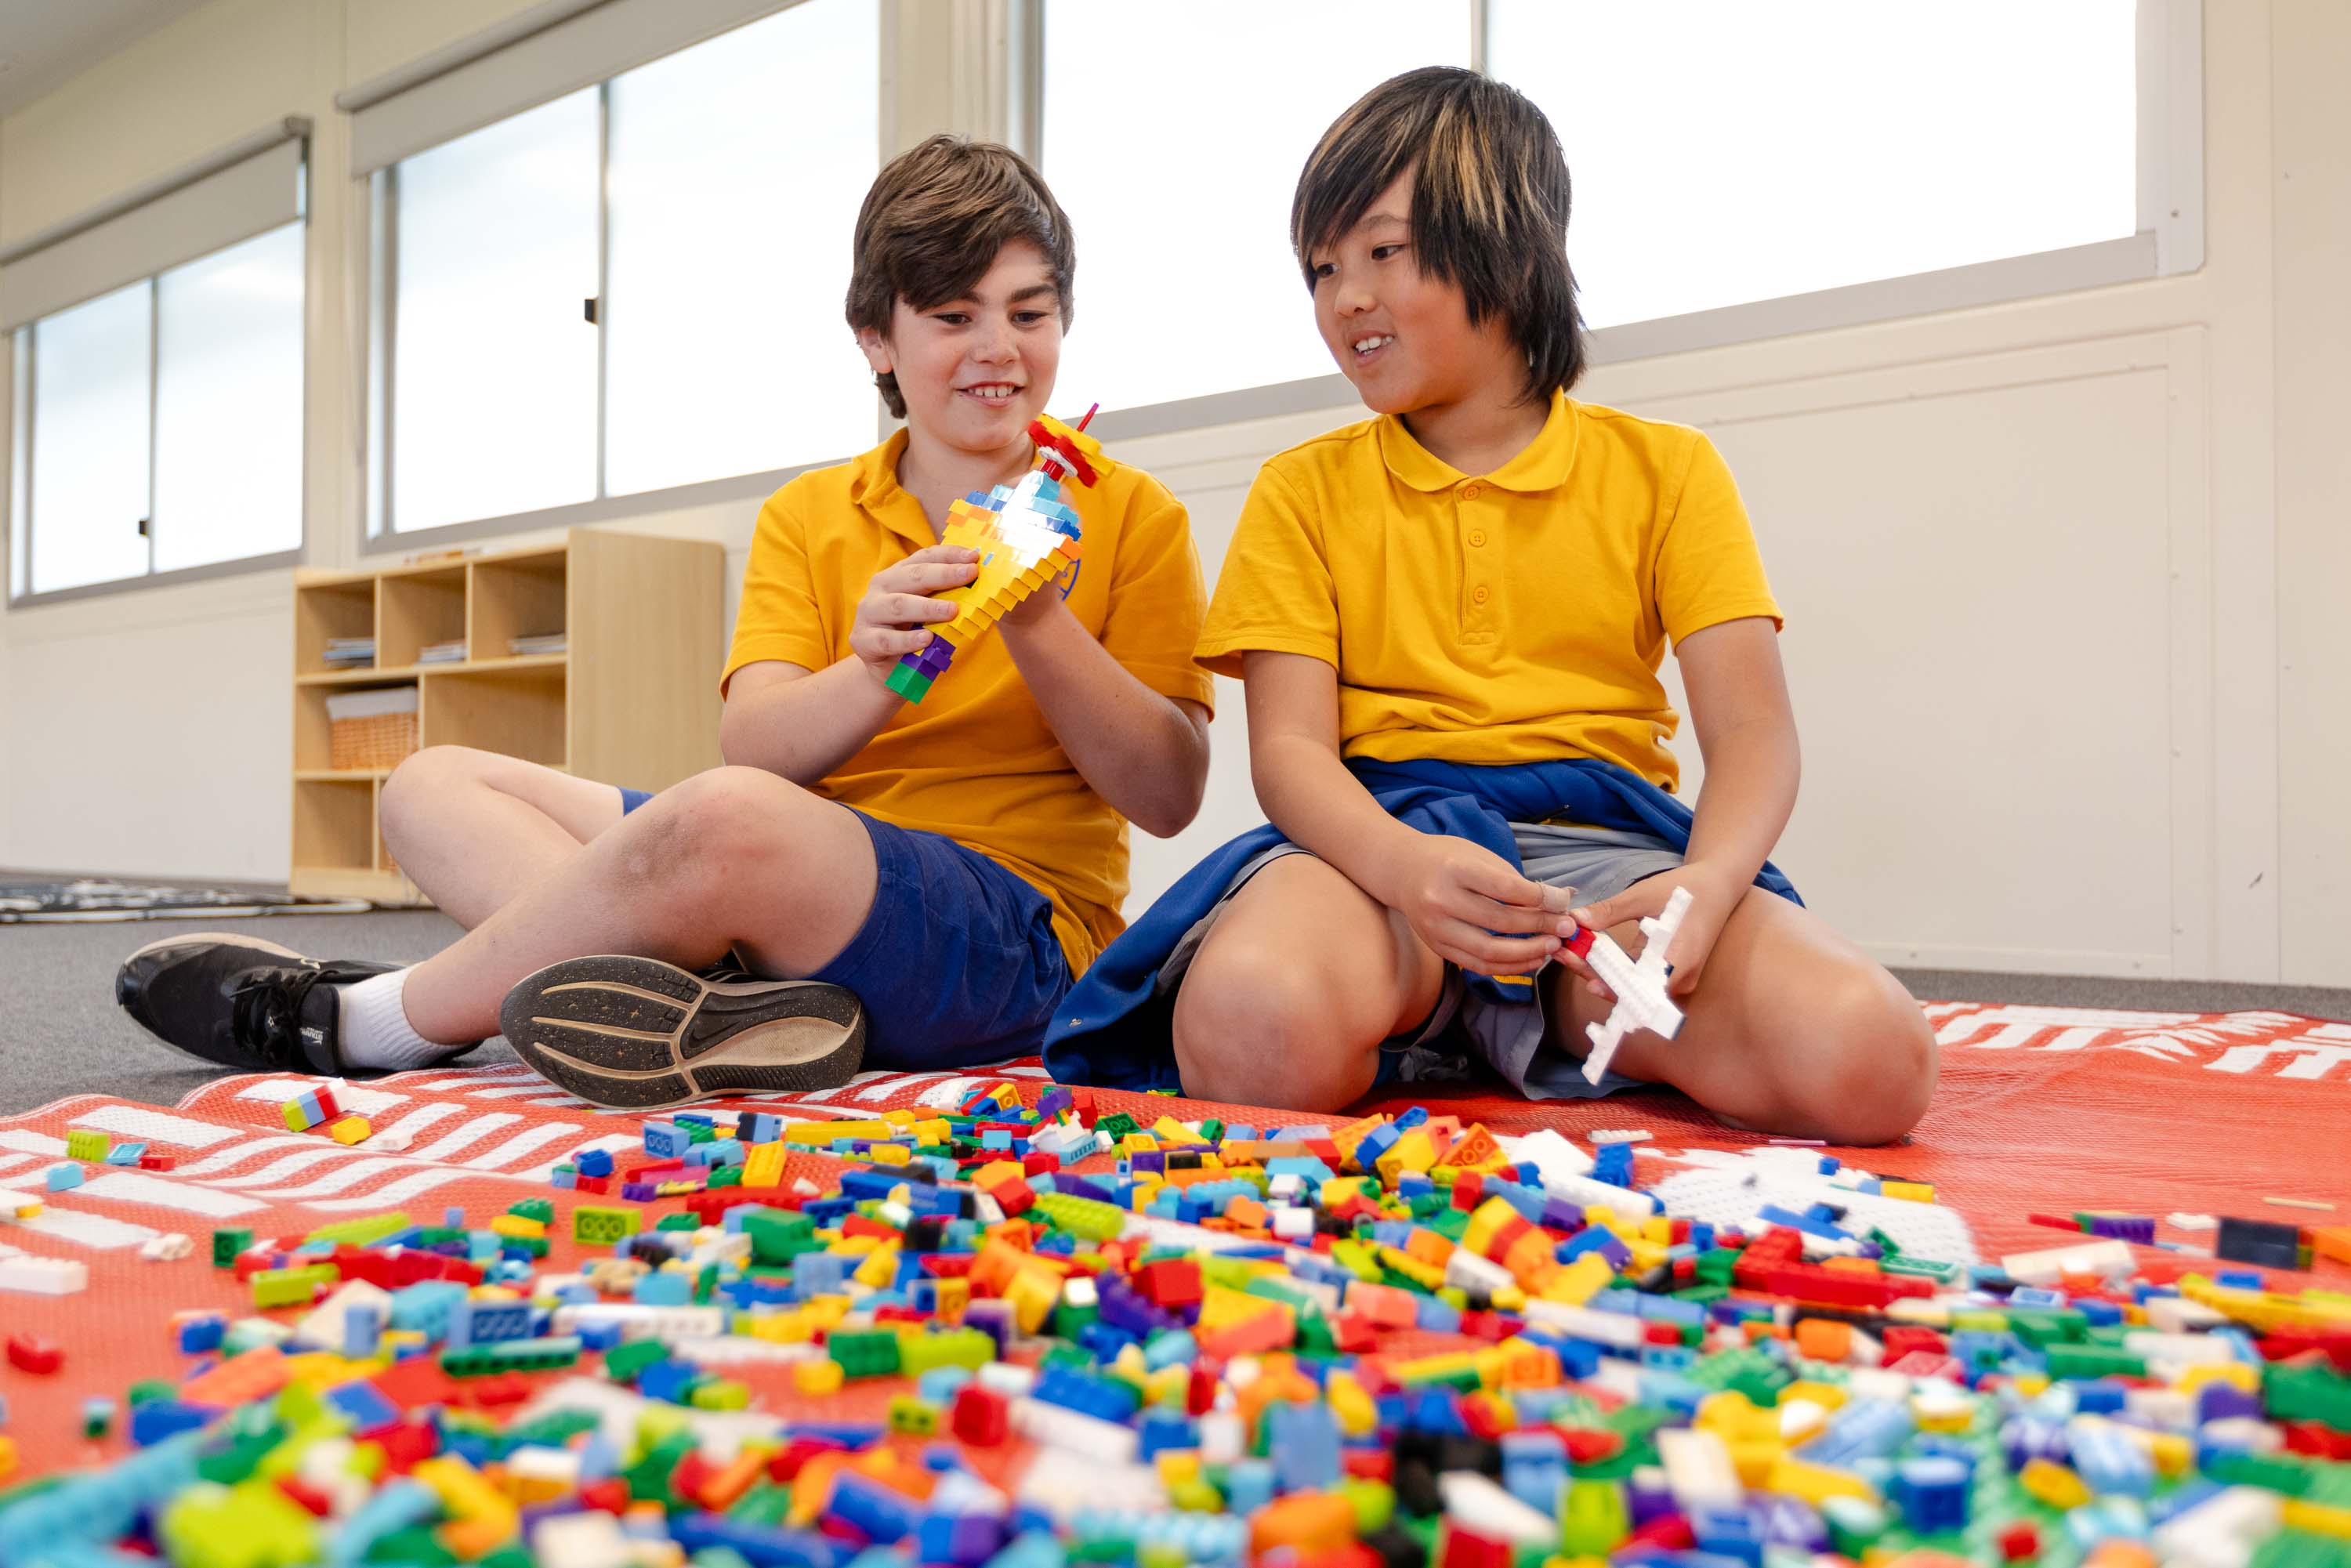 Benefits of LEGO® for your child